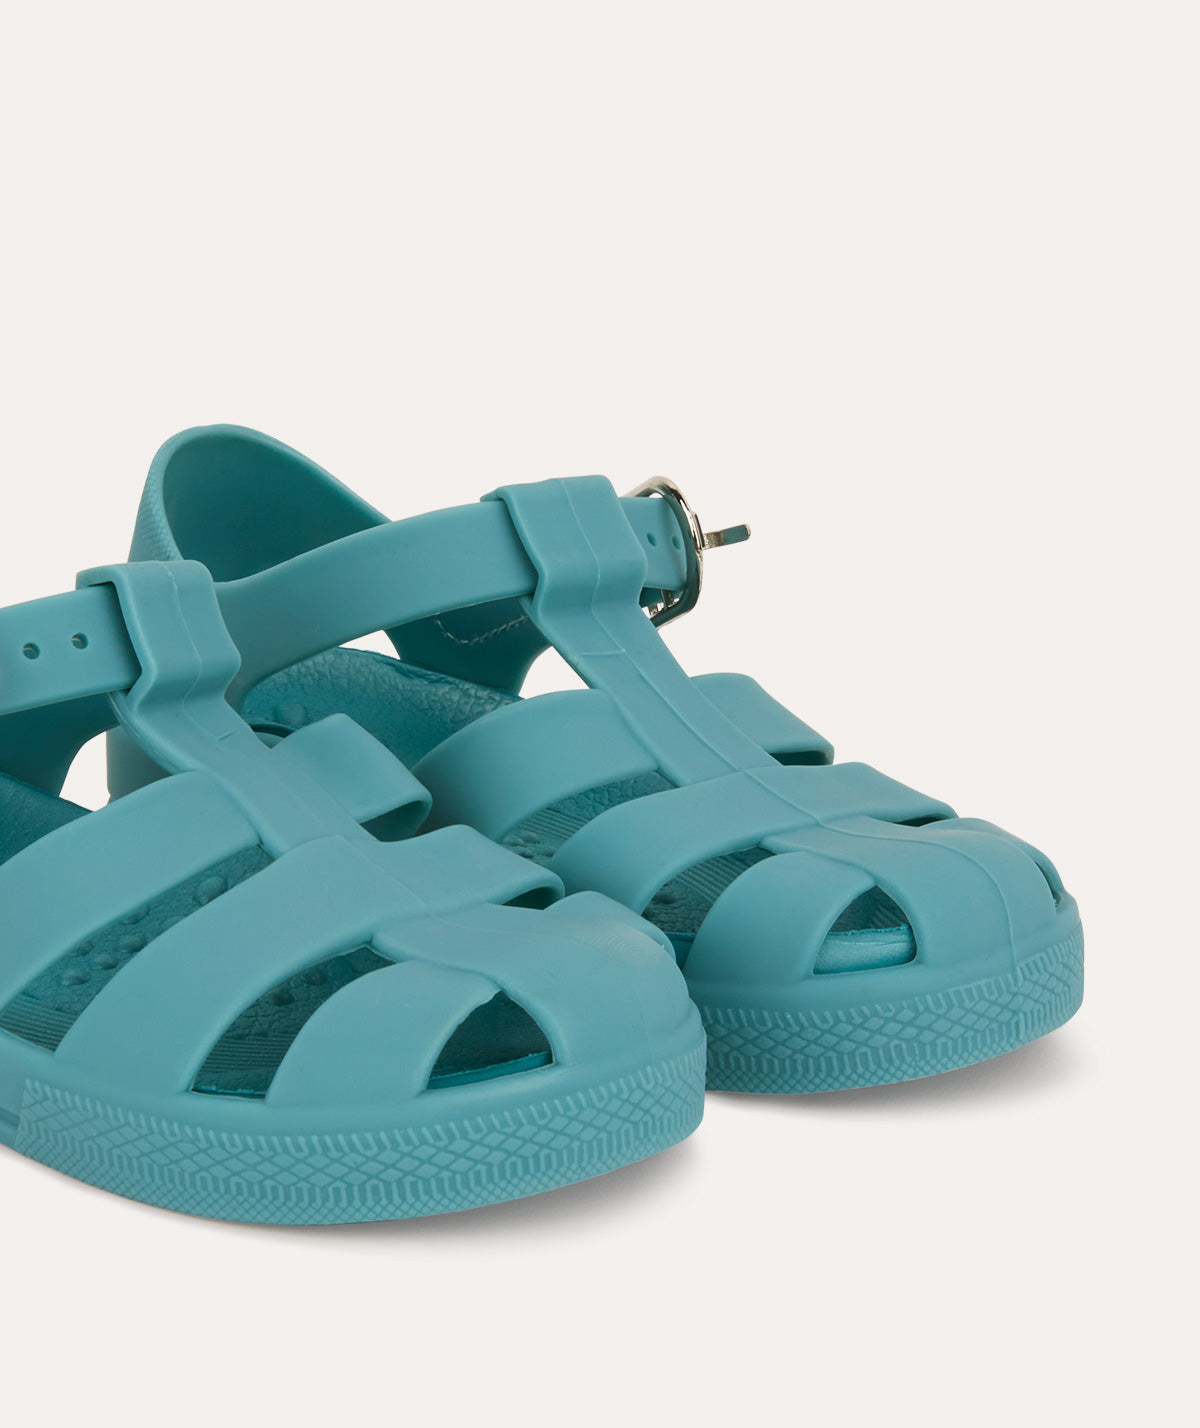 Buy the KIDLY Label Jelly Sandal online at KIDLY